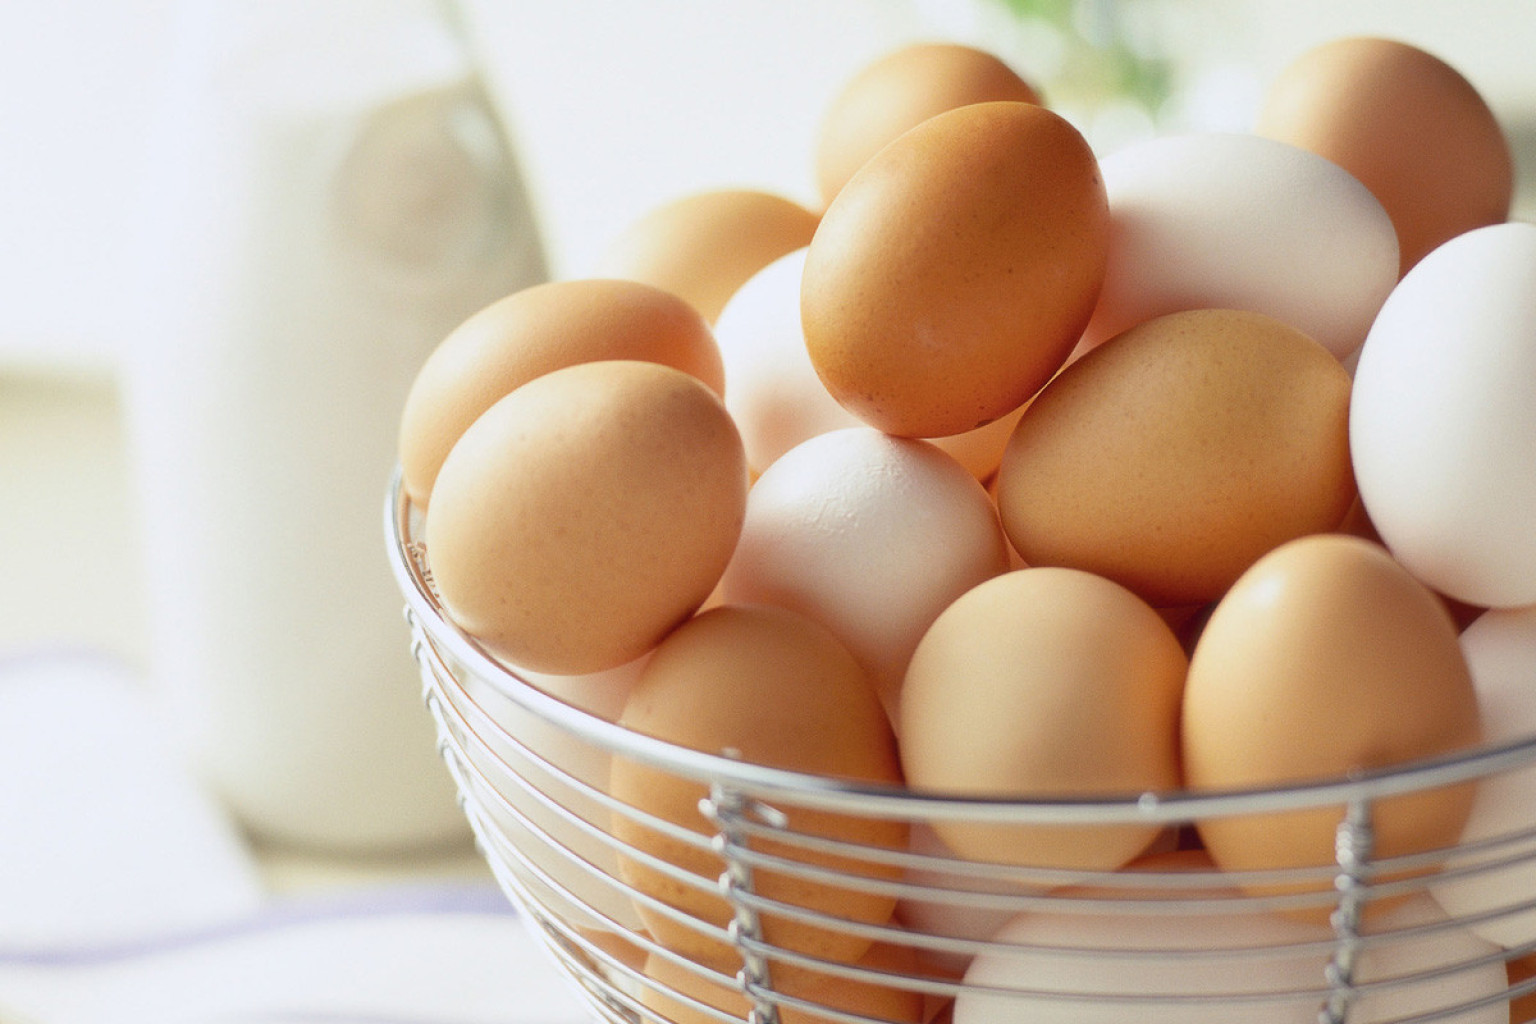 Myths And Facts About Eggs That You Should Know